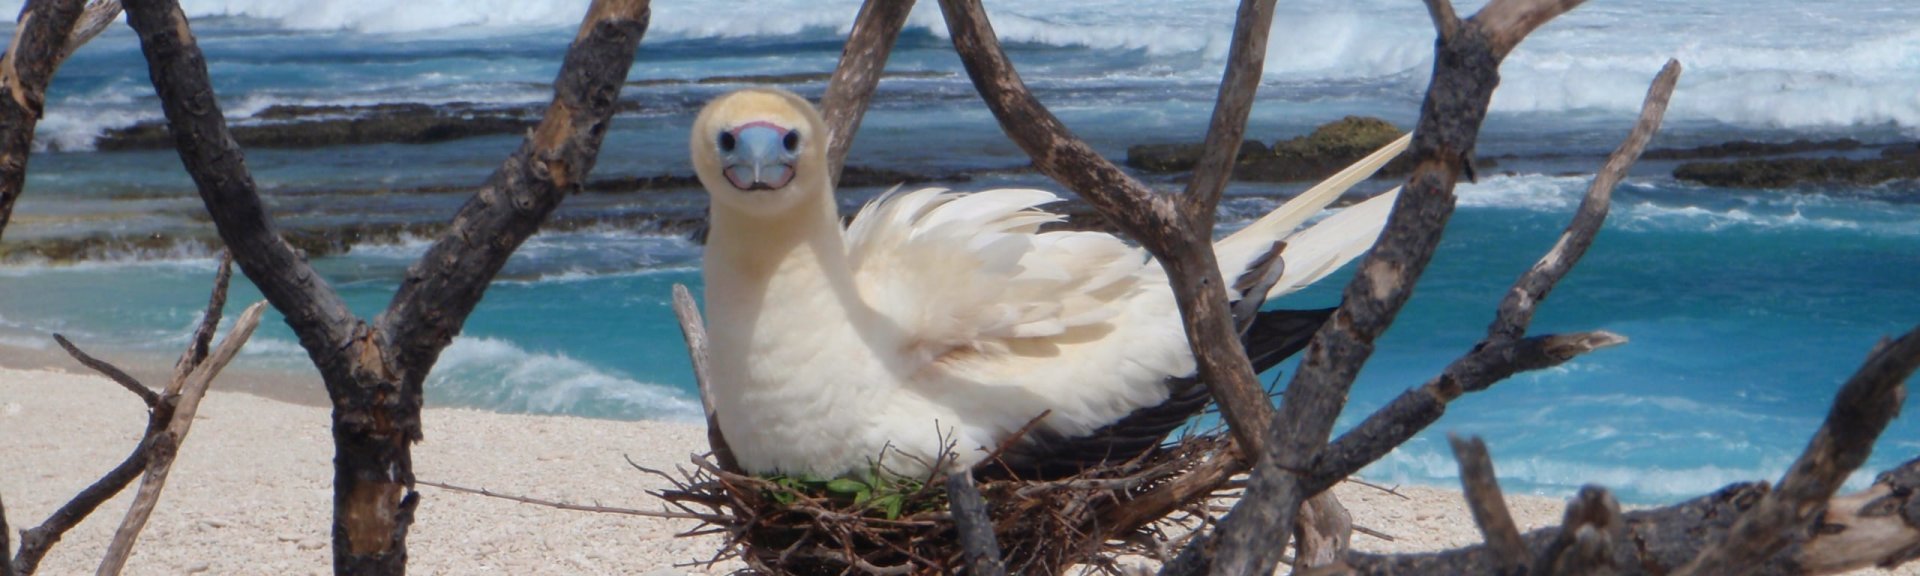 Red footed booby nest, credit parks australia.